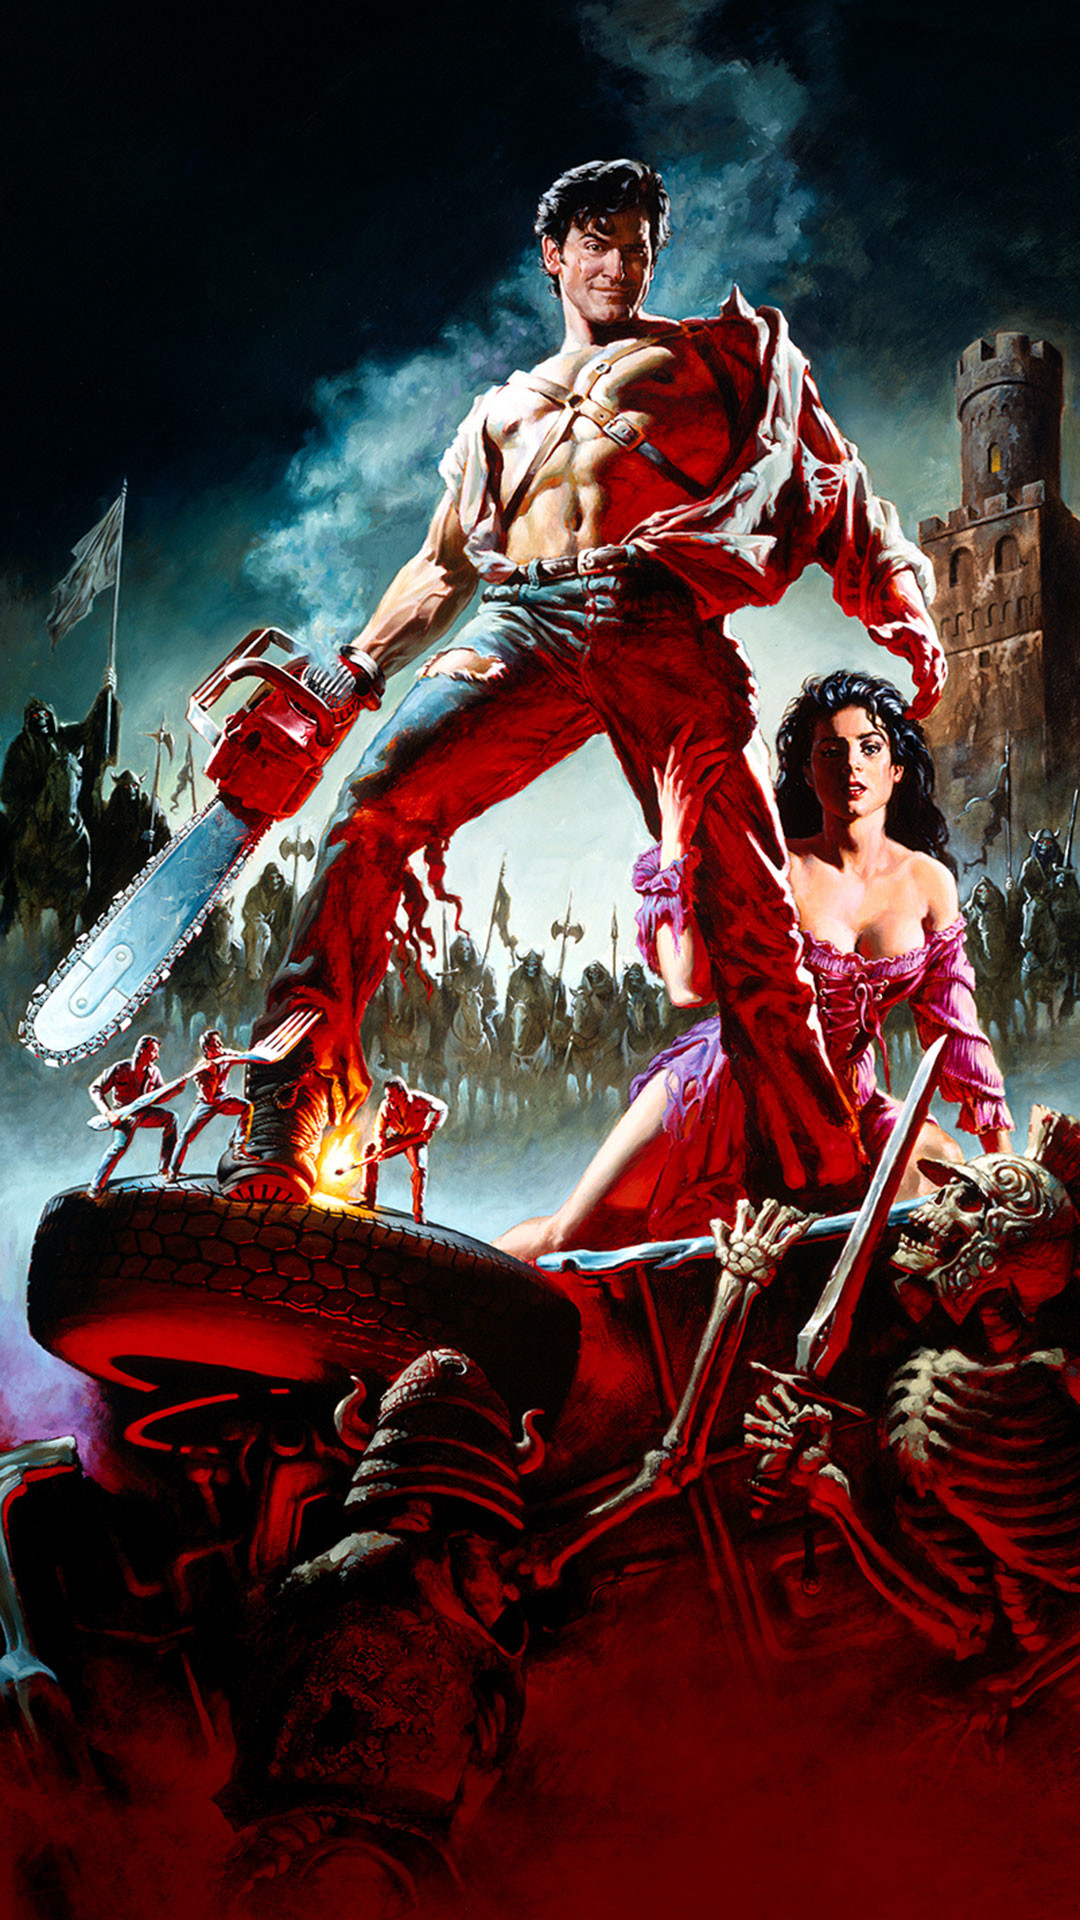 1080x1920 Army of Darkness Mobile Wallpaper 1080Ã1920